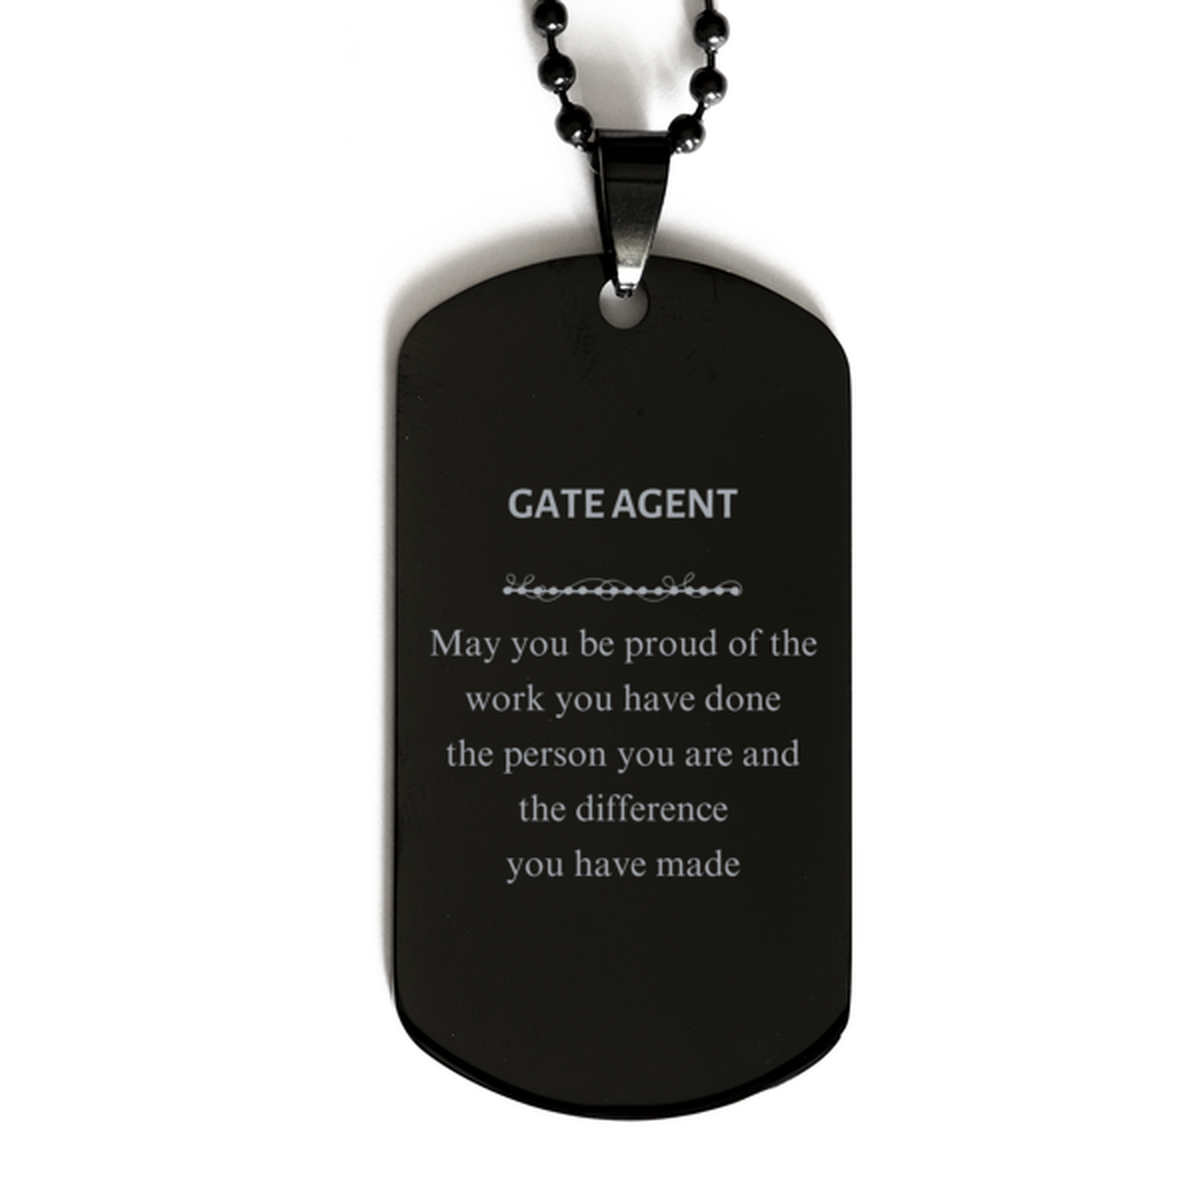 Gate Agent May you be proud of the work you have done, Retirement Gate Agent Black Dog Tag for Colleague Appreciation Gifts Amazing for Gate Agent